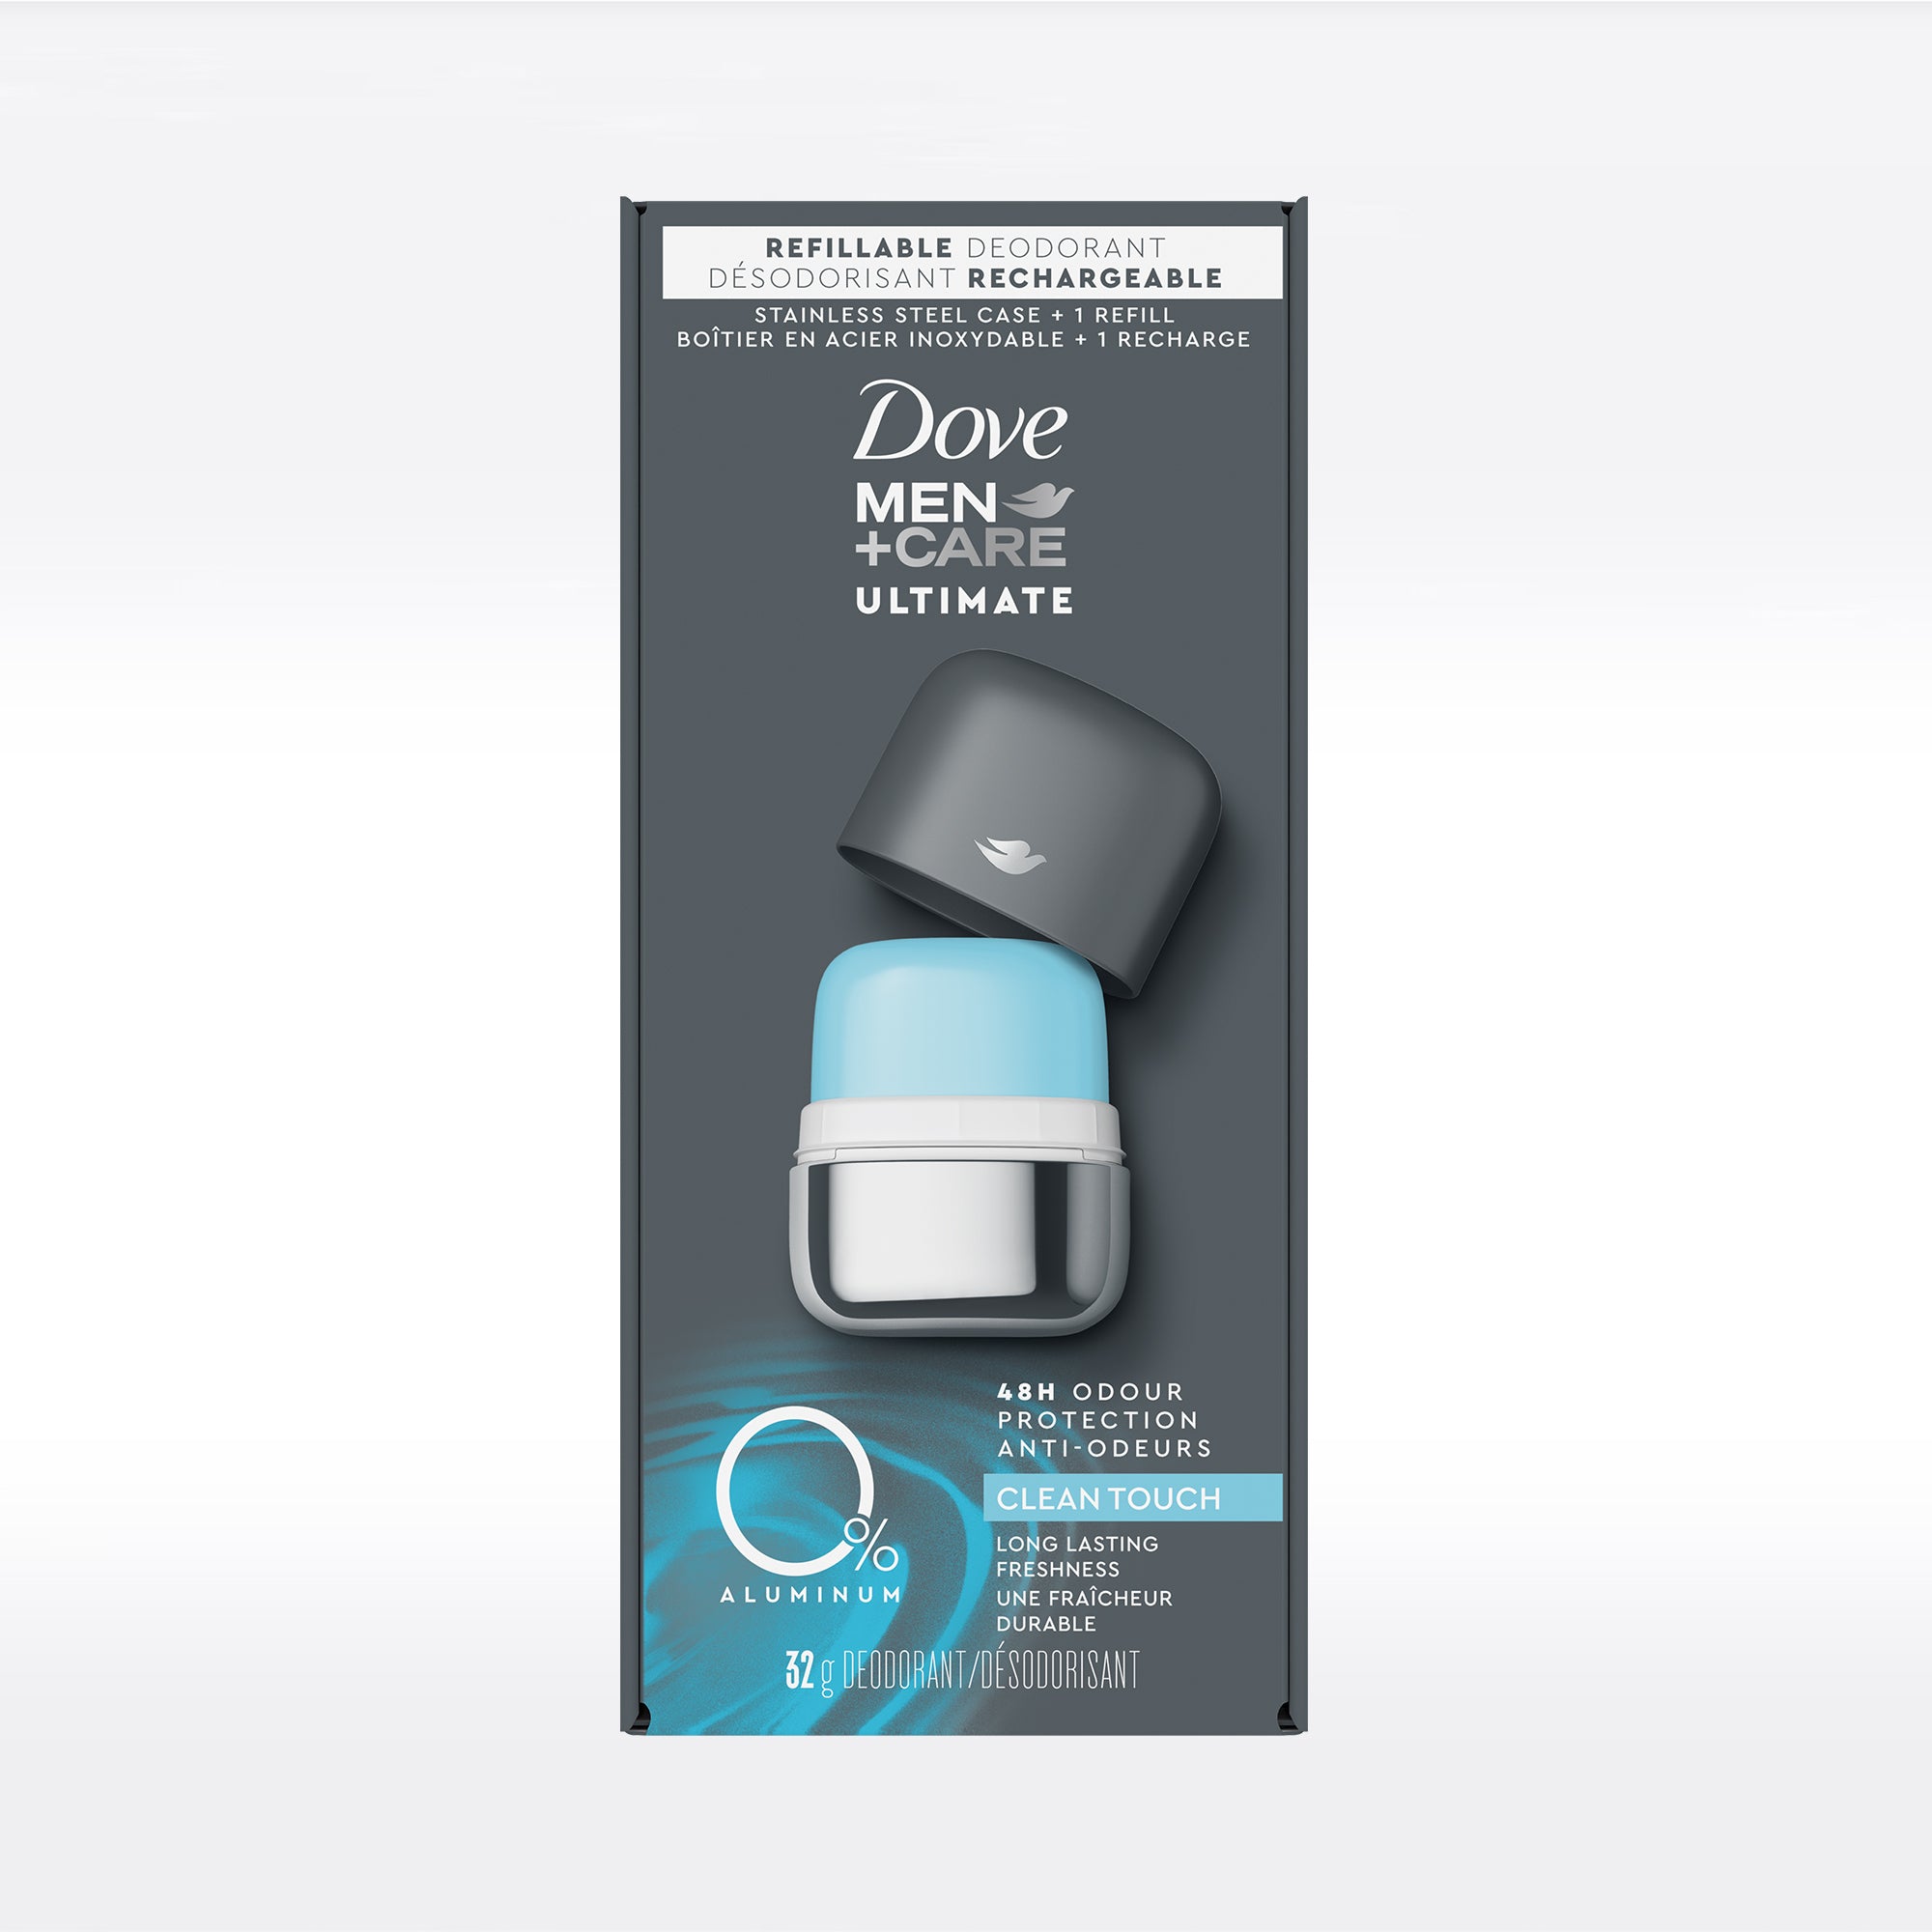 Showing the front angle view of the Dove Men+Care Clean Touch Starter Kit 32g product.